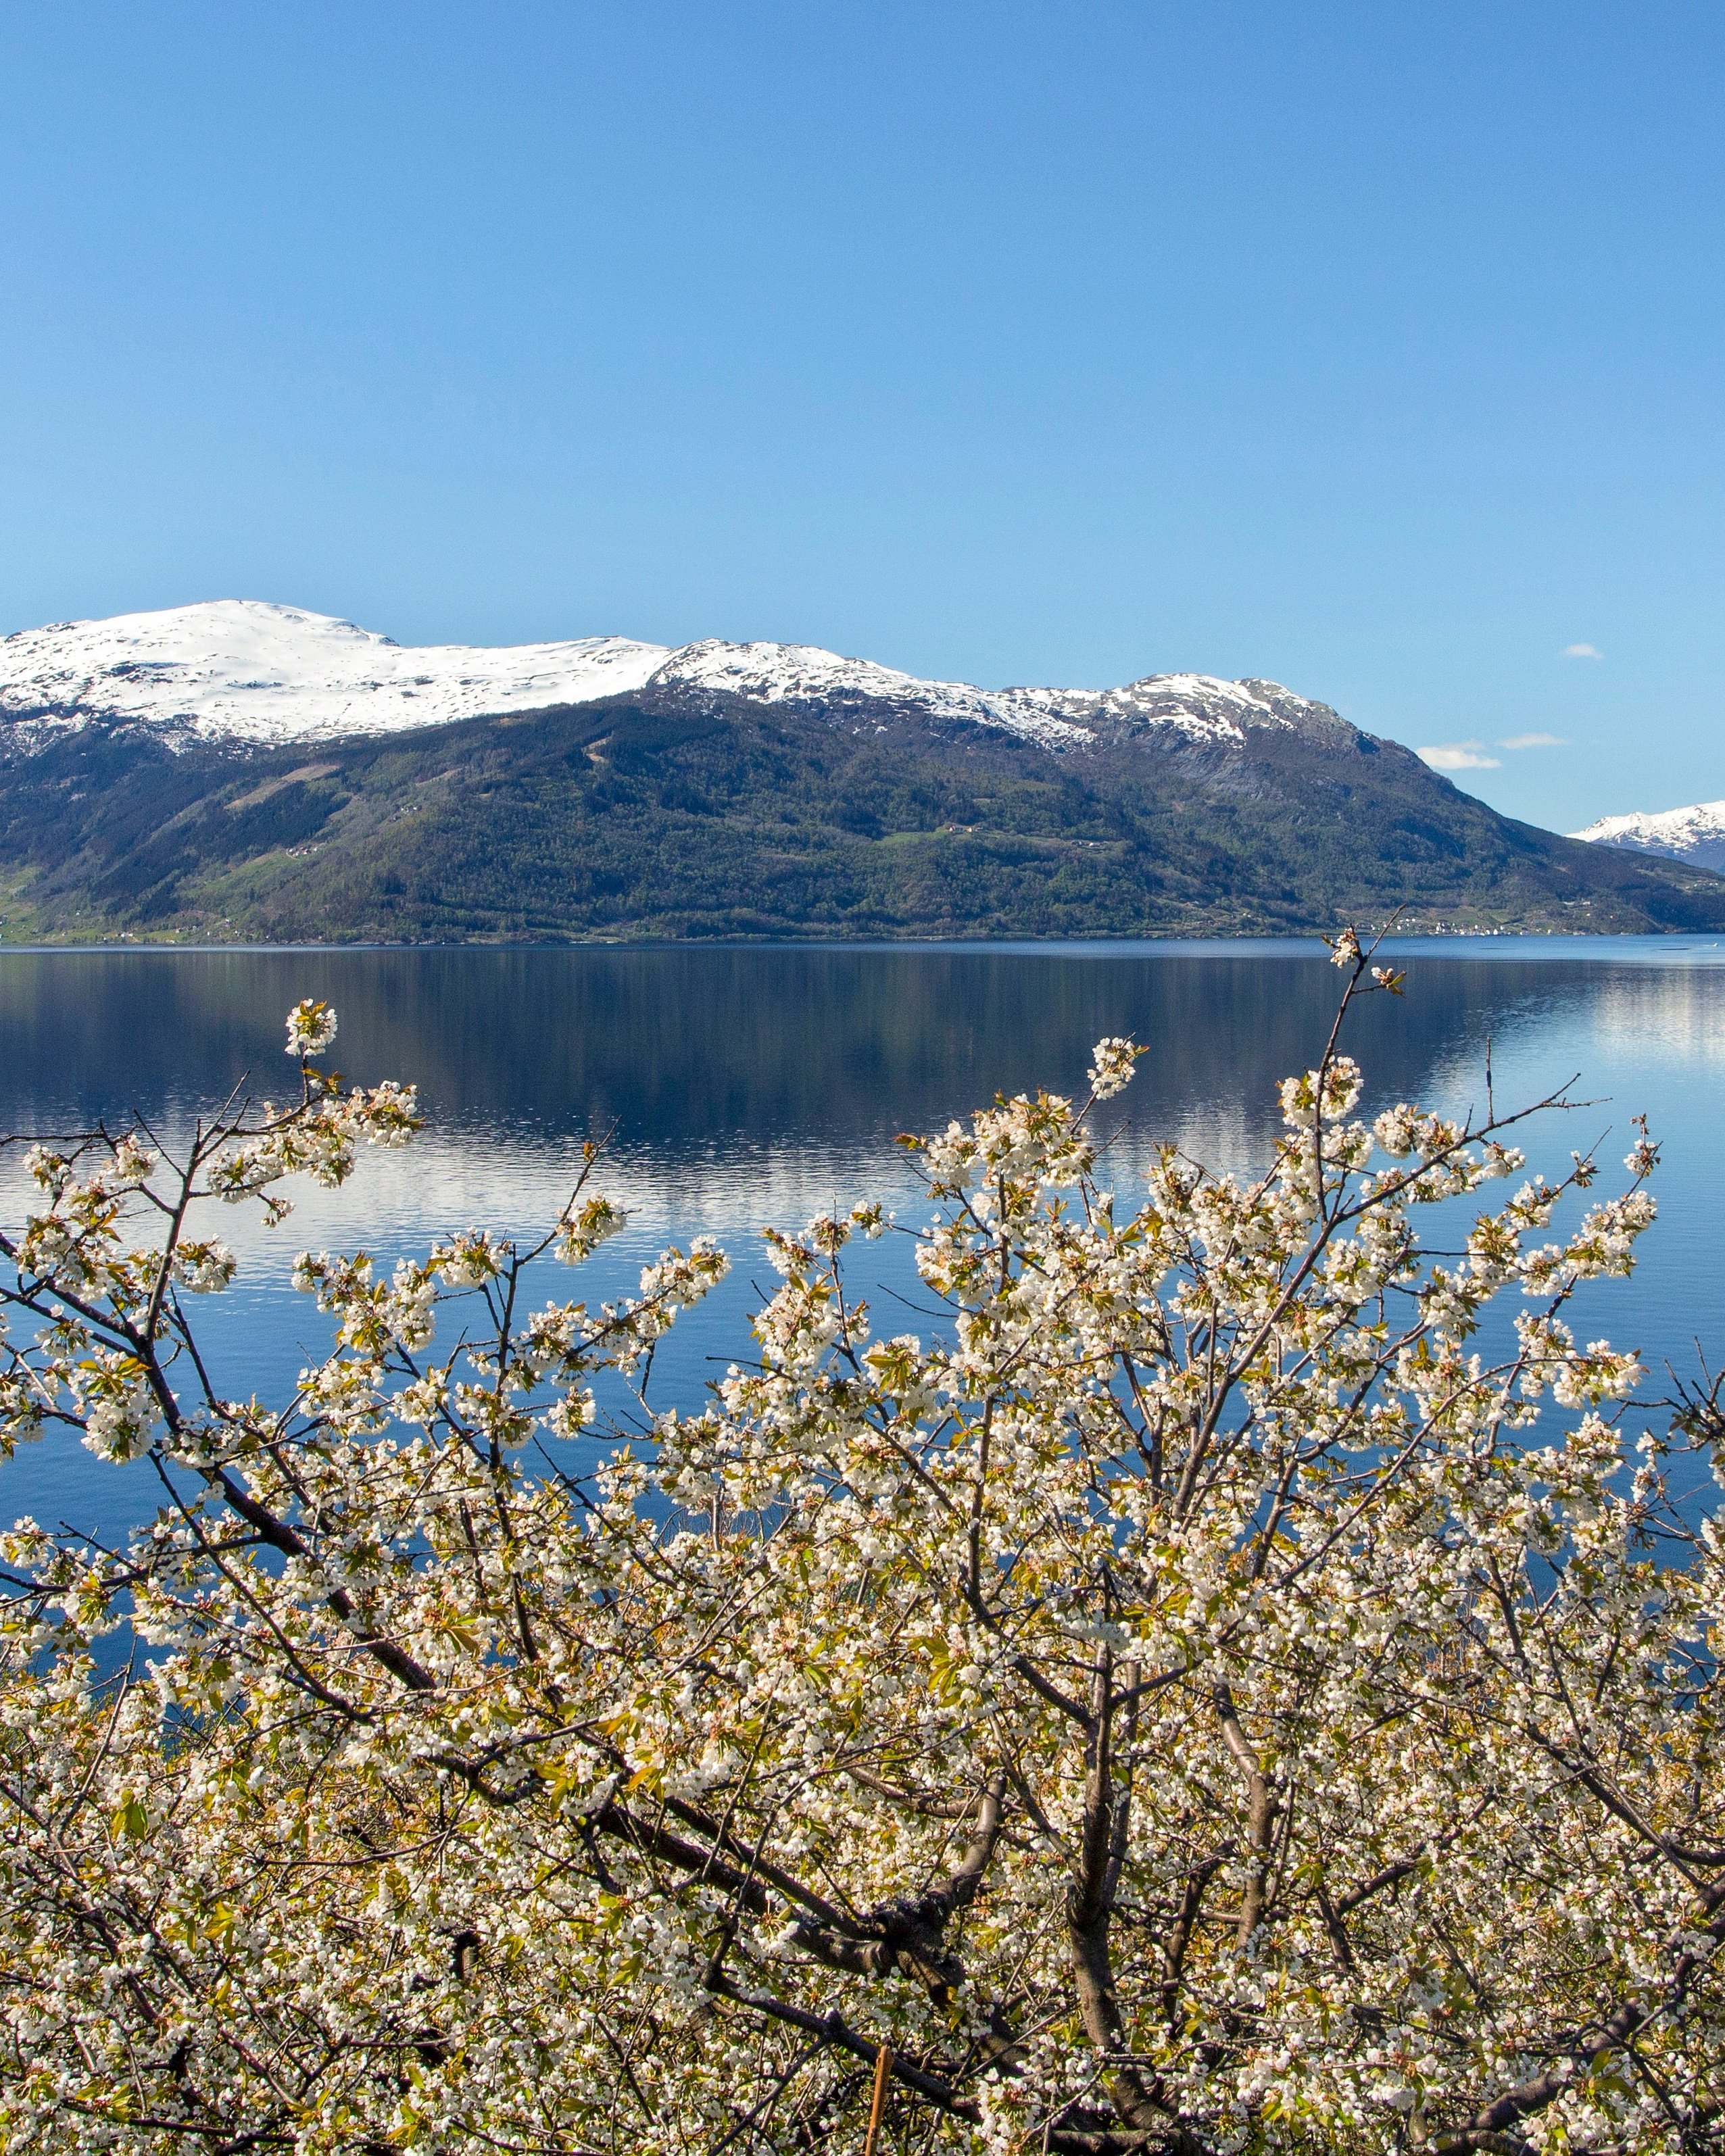 Flowering orchards by Kinsarvik.